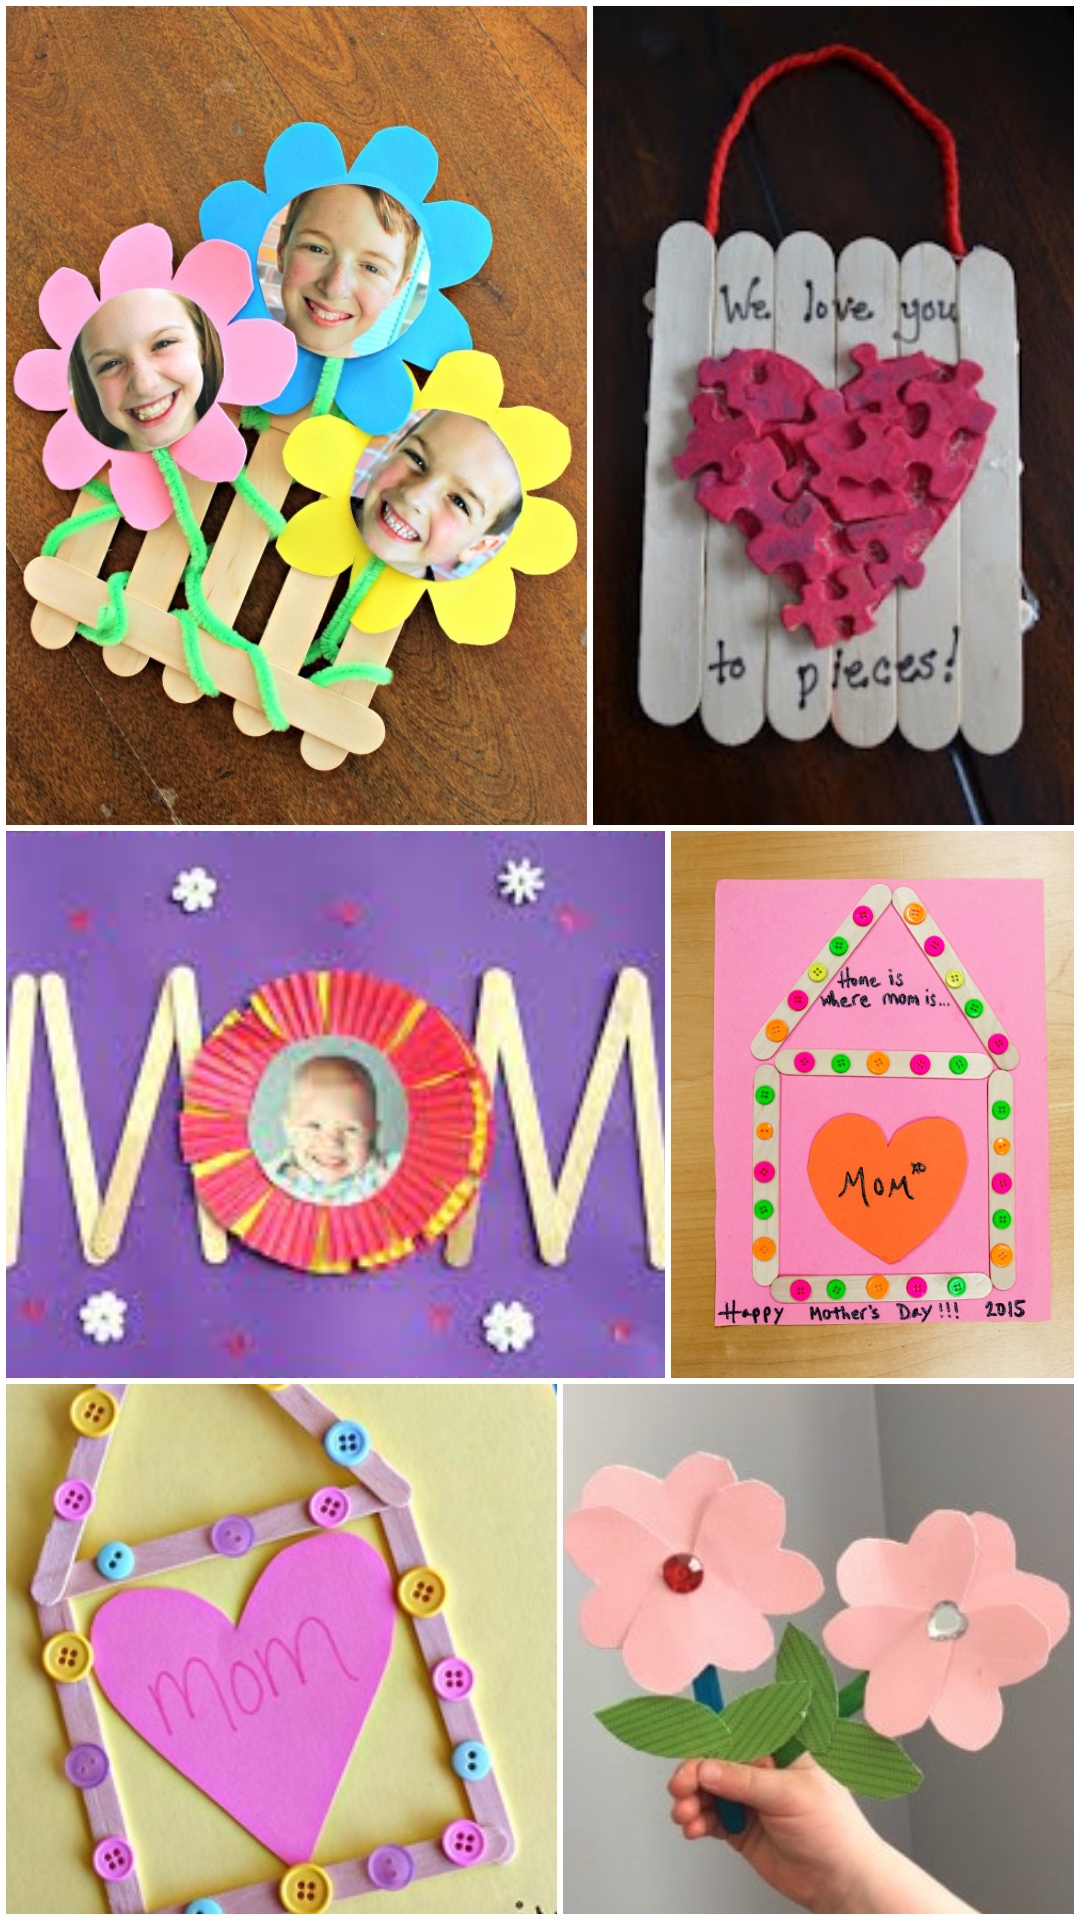 DIY Mother's Day Card Craft Using Popsicle Sticks